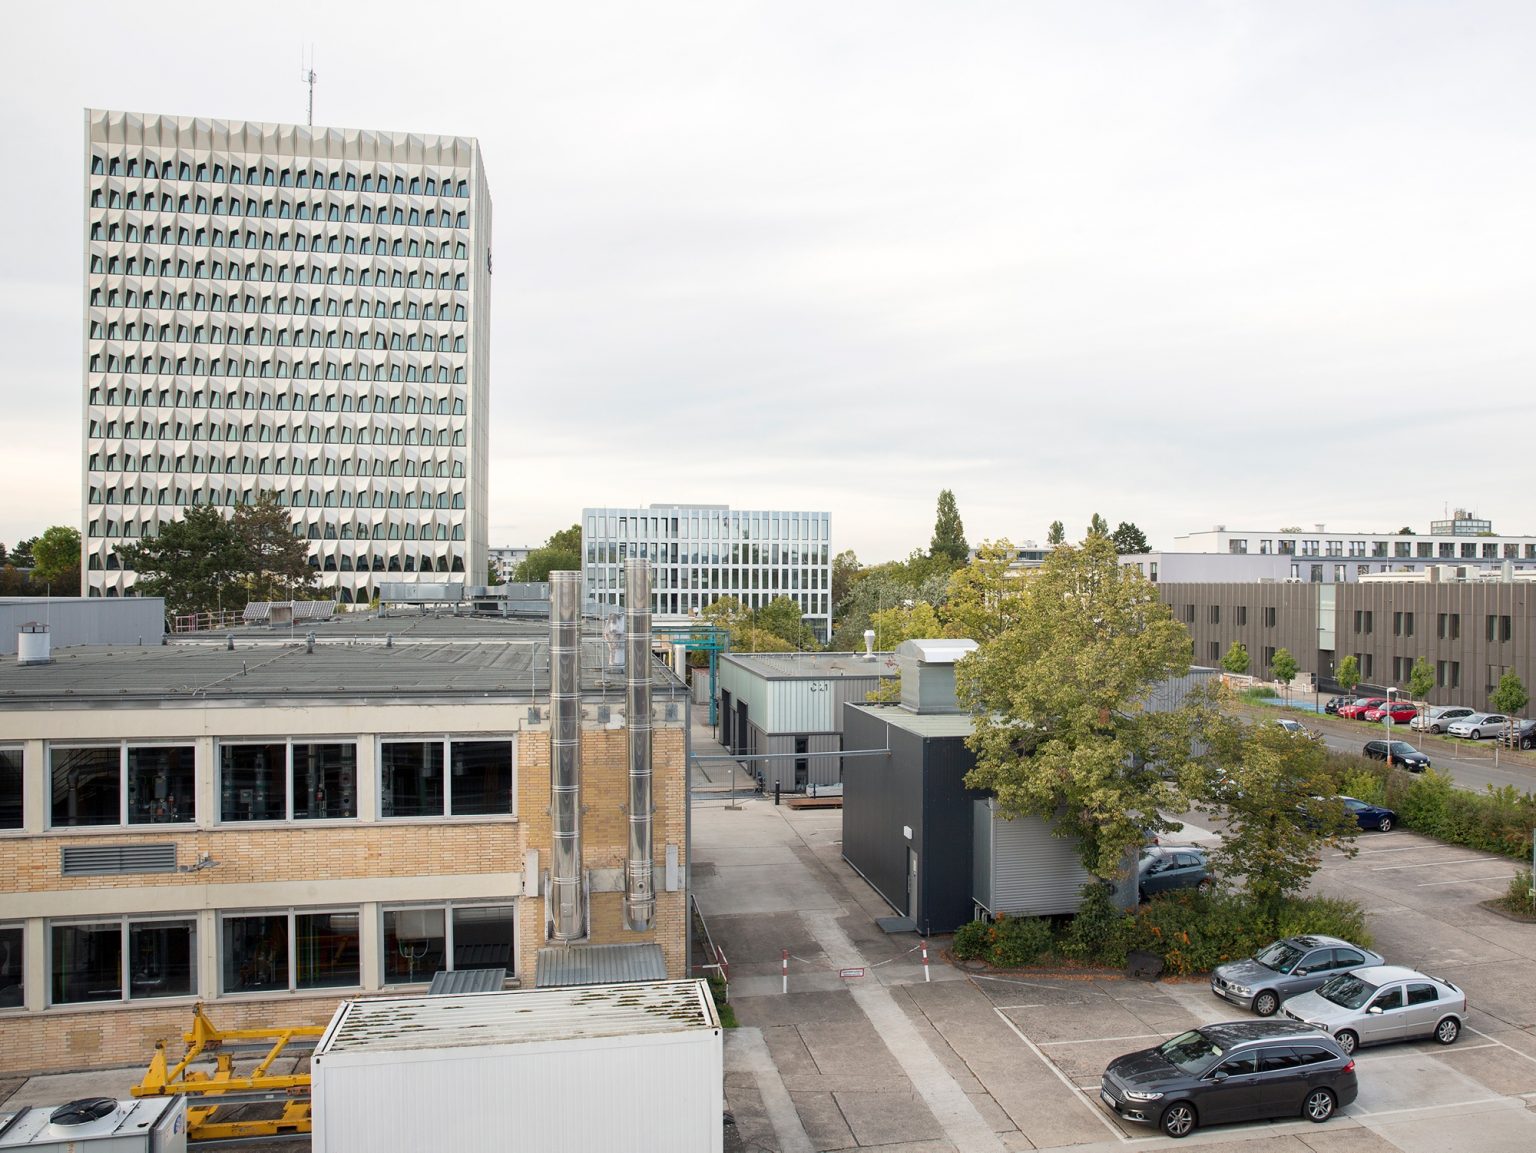 View of University of Applied Sciences in Darmstadt. Out of 16,500 students in total, 2,970 (18 %) are international.
Darmstadt, Germany,2021